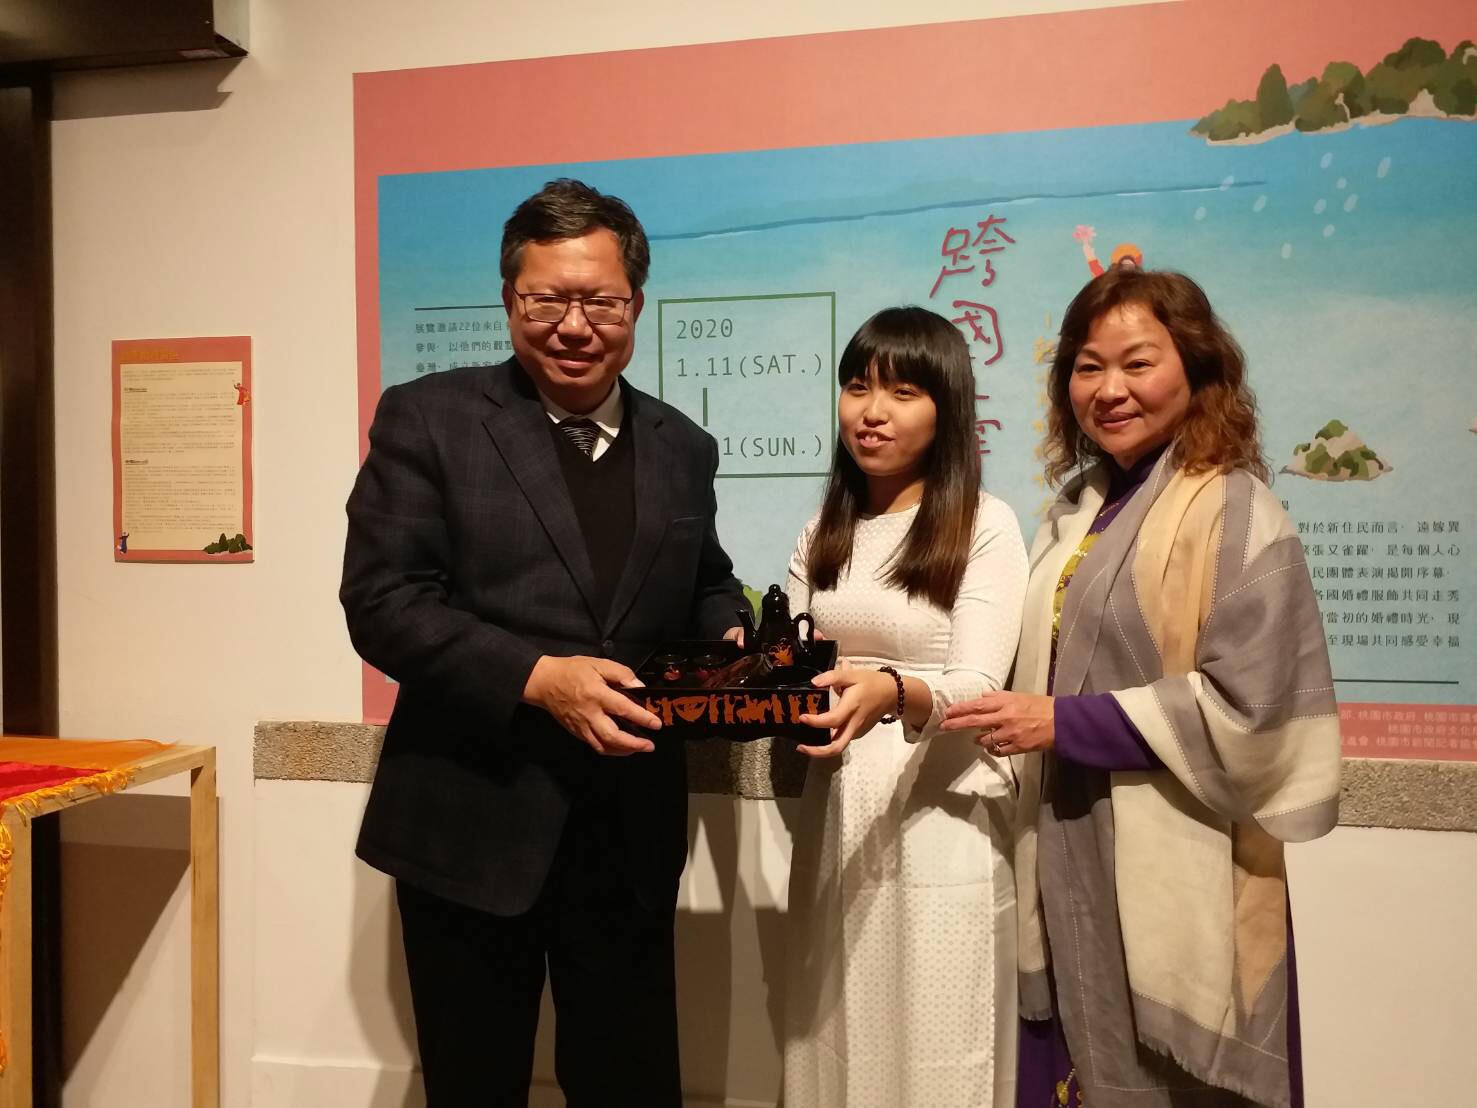 Mayor of Taoyuan City, Zheng Wencan (left), and Founder of the Vietnamese Spouses Rights Association, Feng Yuyingm (right), at the event. Source: Vietnamese Spouses Rights Association